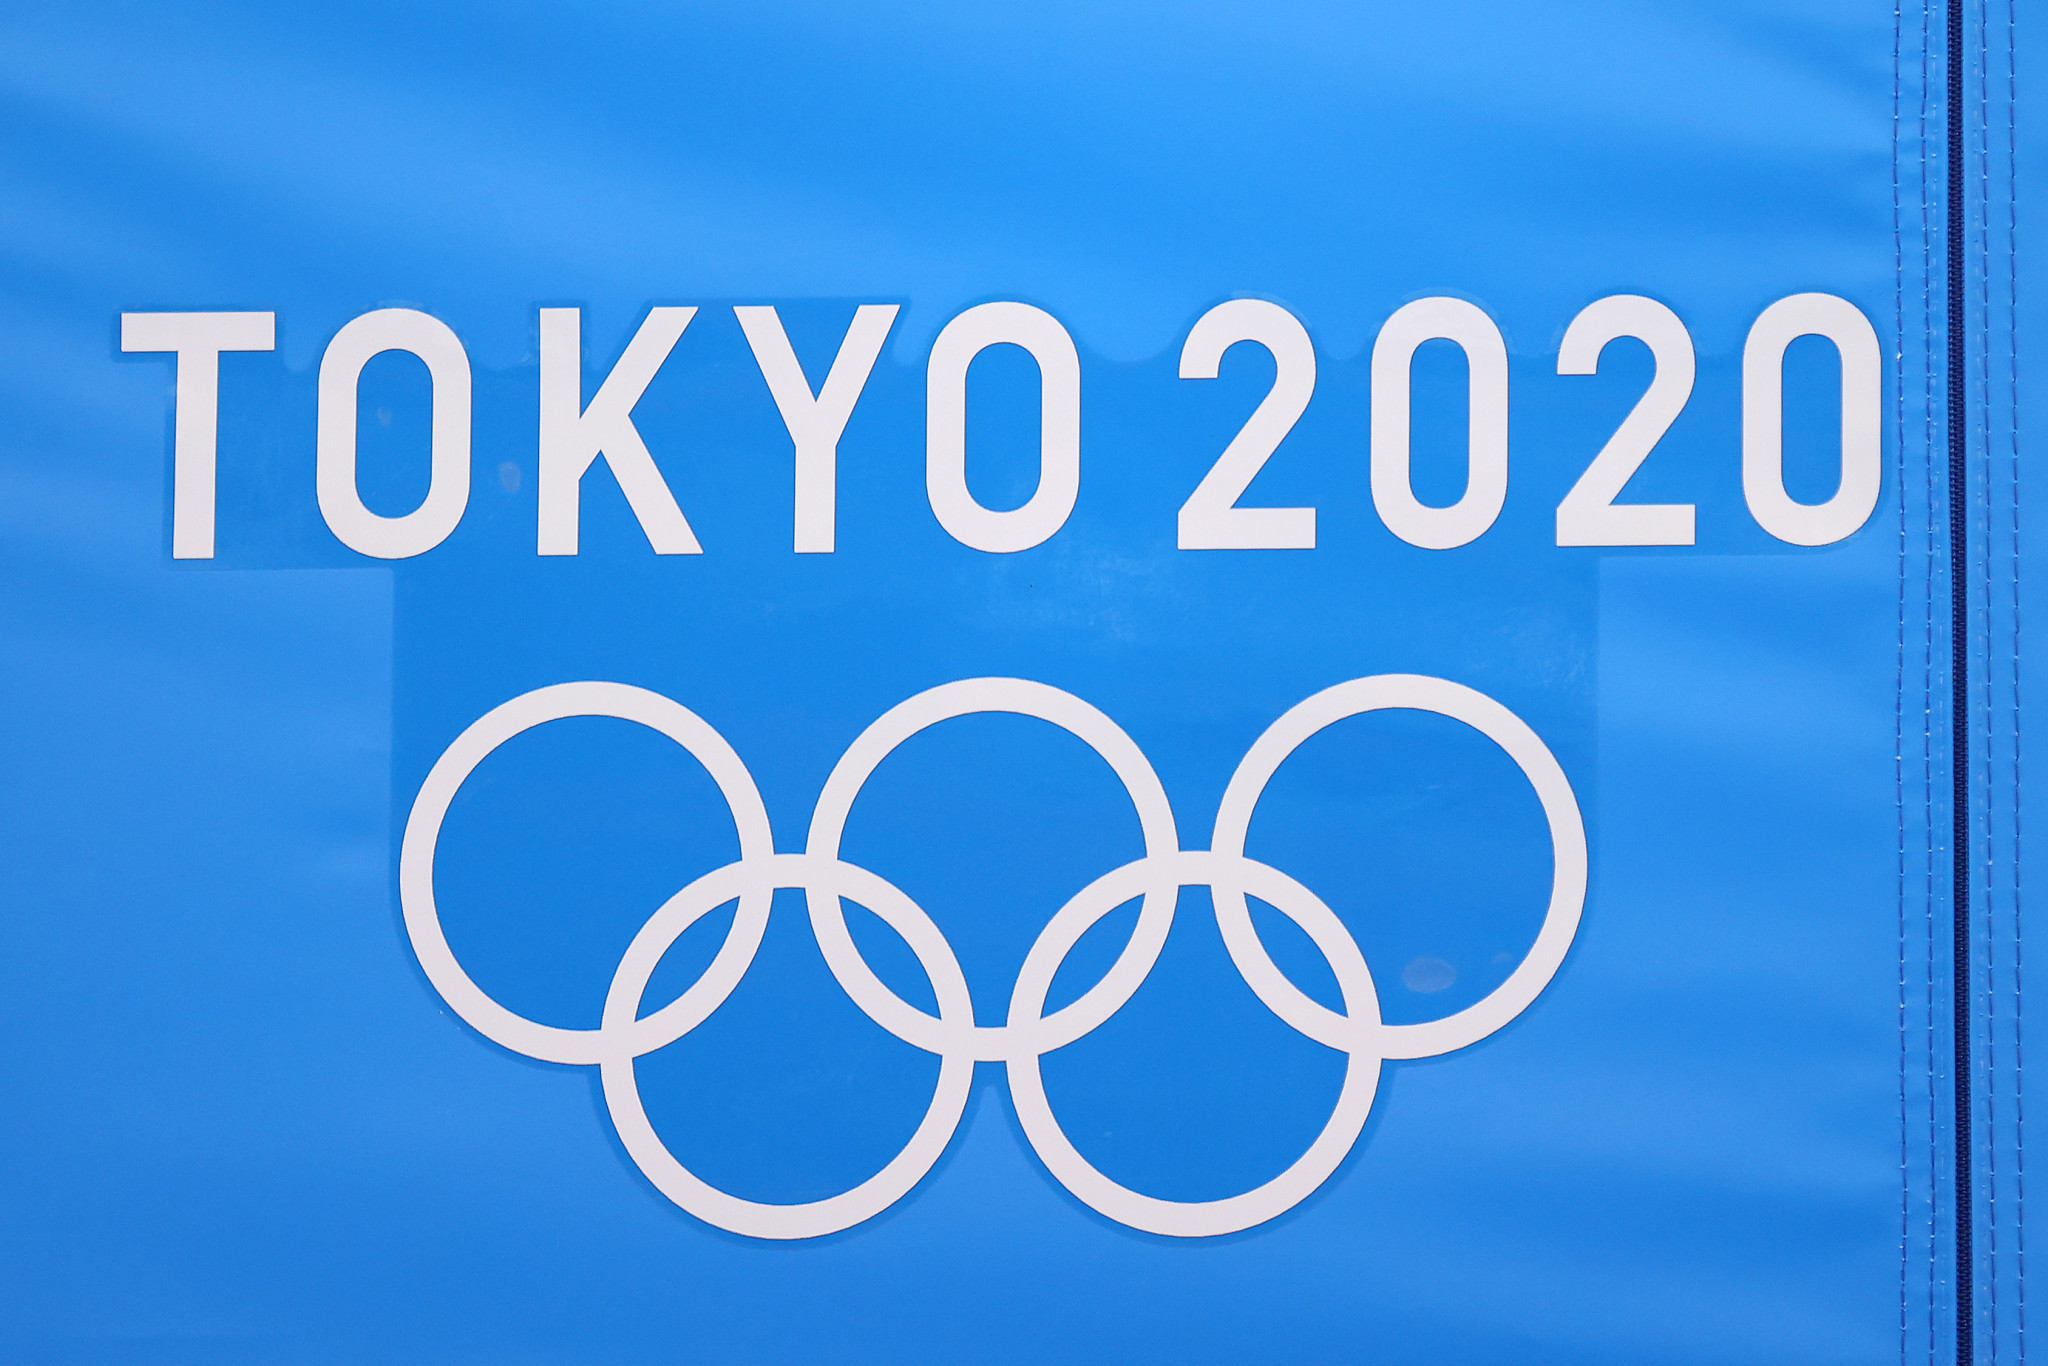 NOCs are due to receive $28.5 milllion in subsidy payment from the IOC following the Tokyo 2020 Olympics ©Getty Images